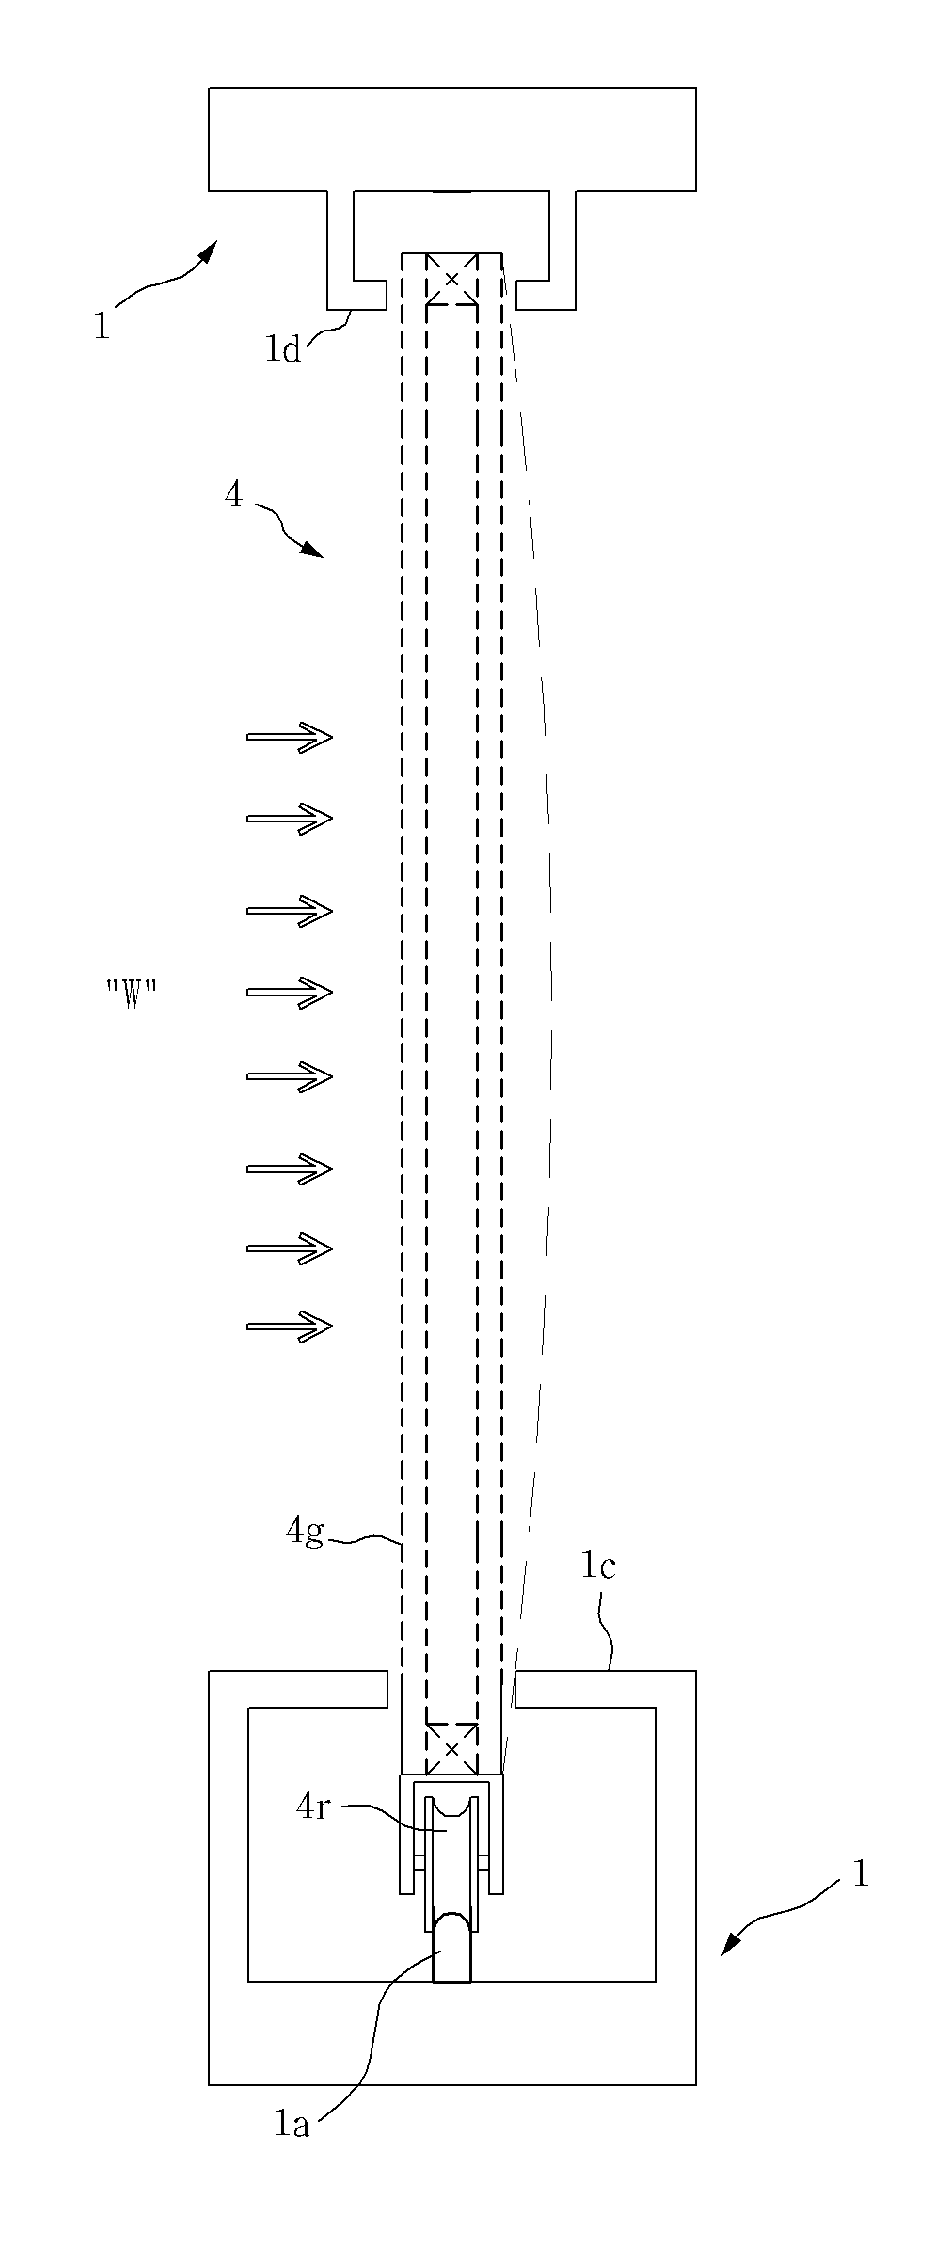 Sliding window installation structure including door guide frame having separable segment structure